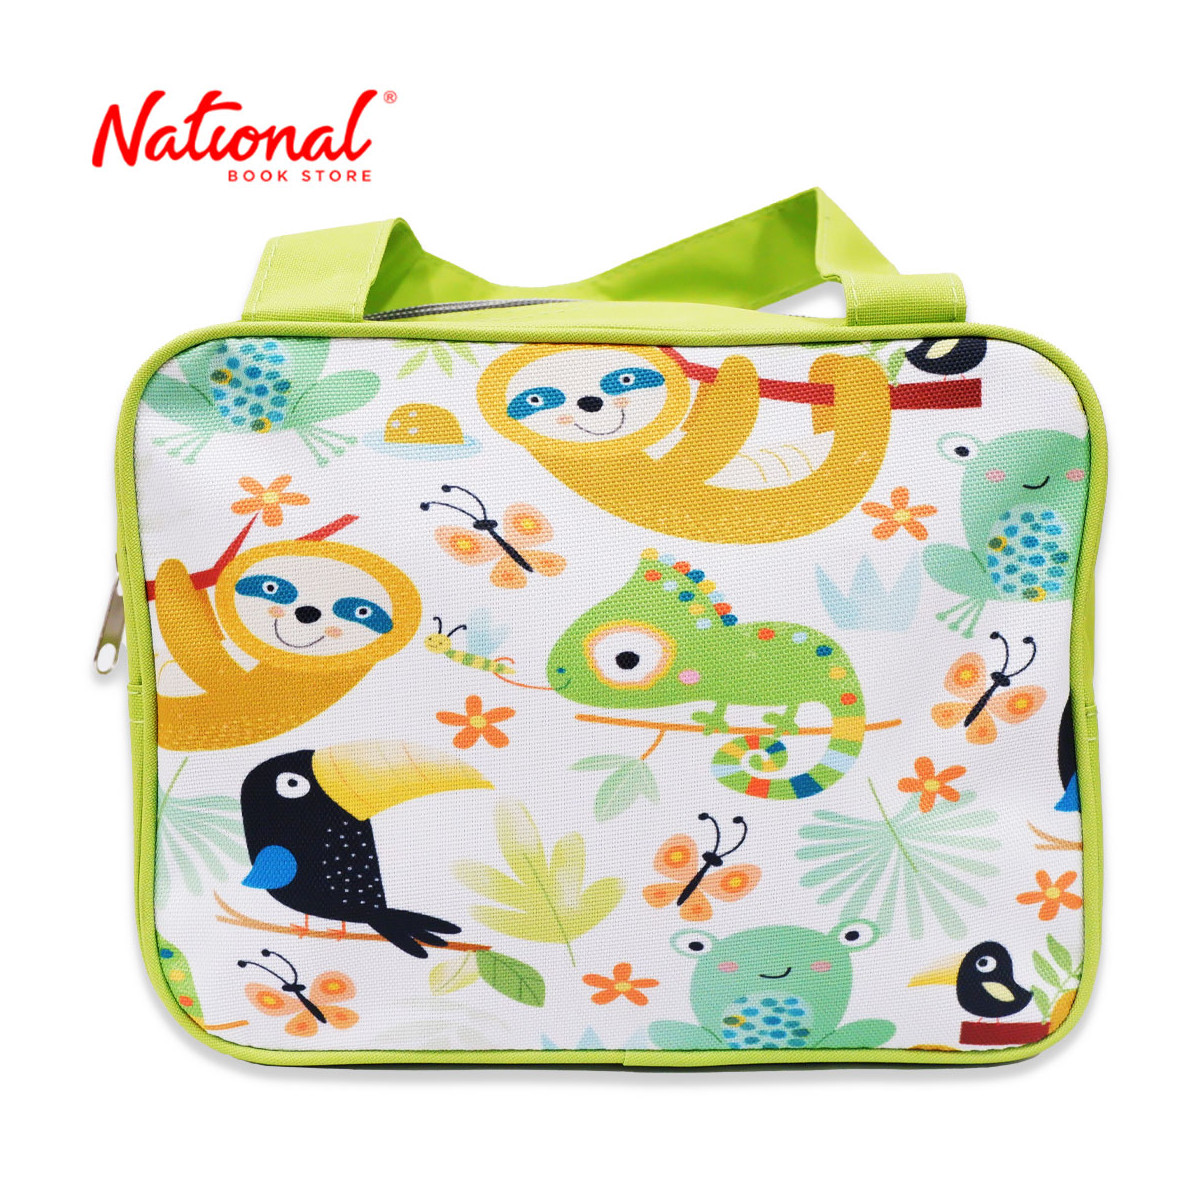 Lunch Bag, Jungle - School Bags for Kids - Food Containers